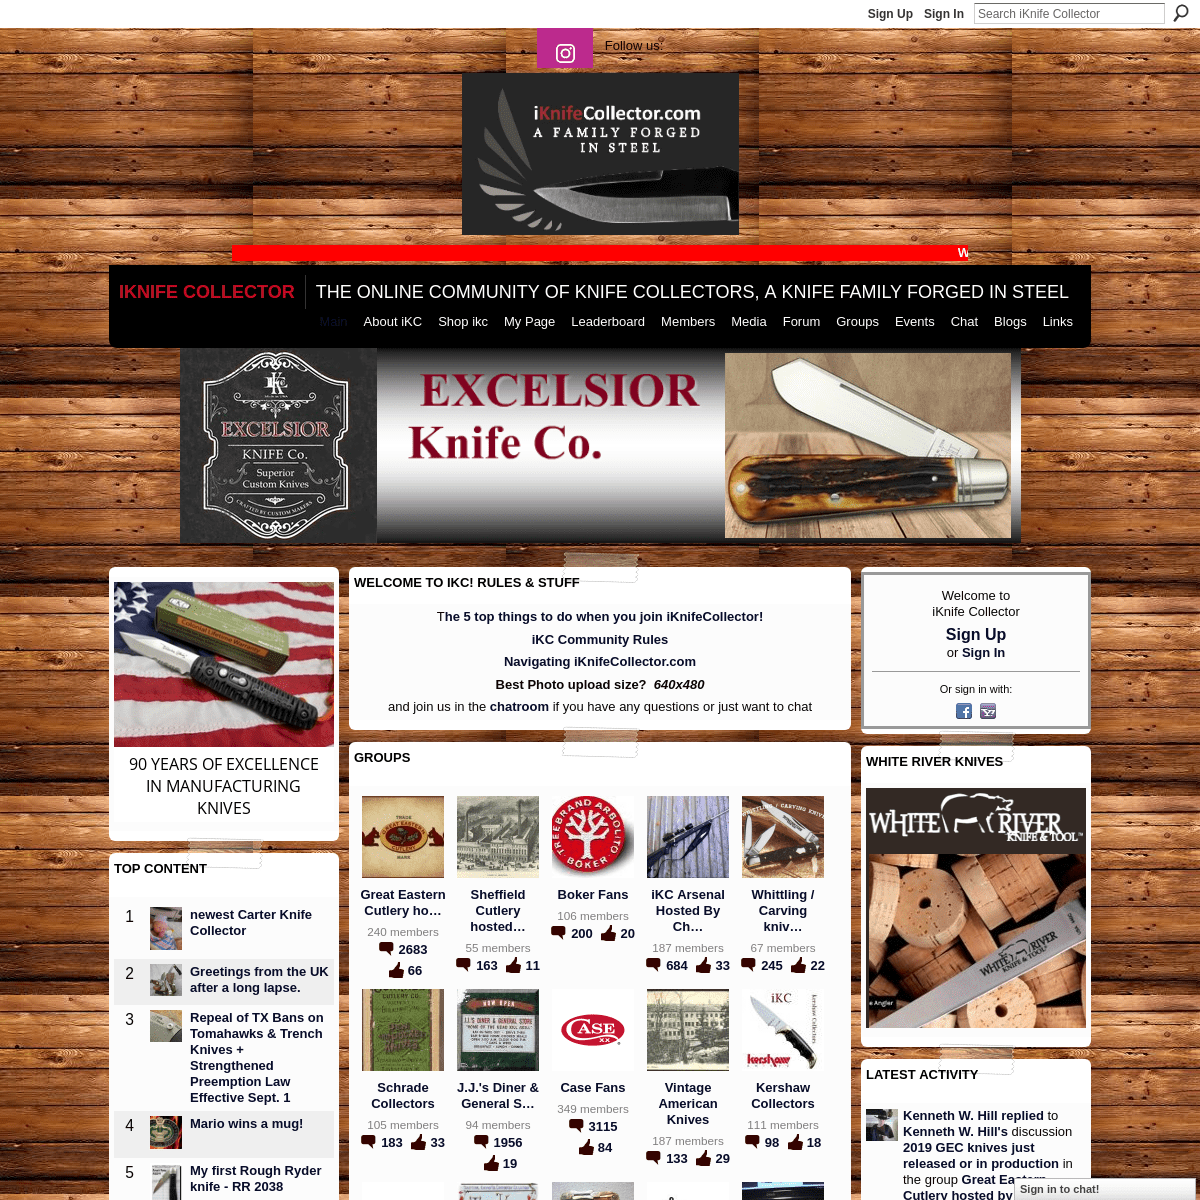 iKnife Collector - The online community of knife collectors, A Knife Family Forged in Steel